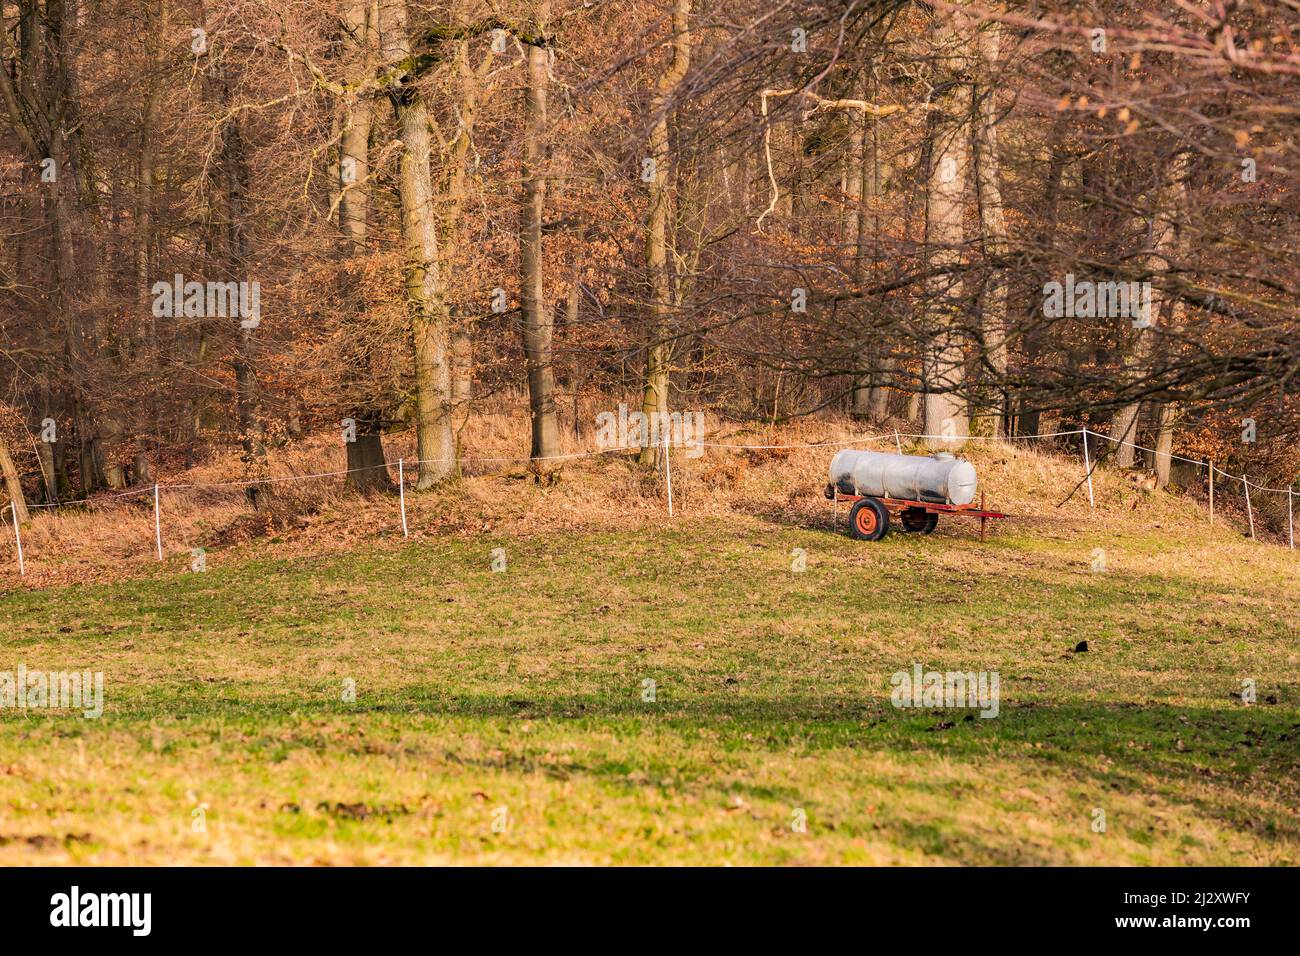 A mobile barrel truck secures water supply for livestock on pasture in rural Germany Stock Photo